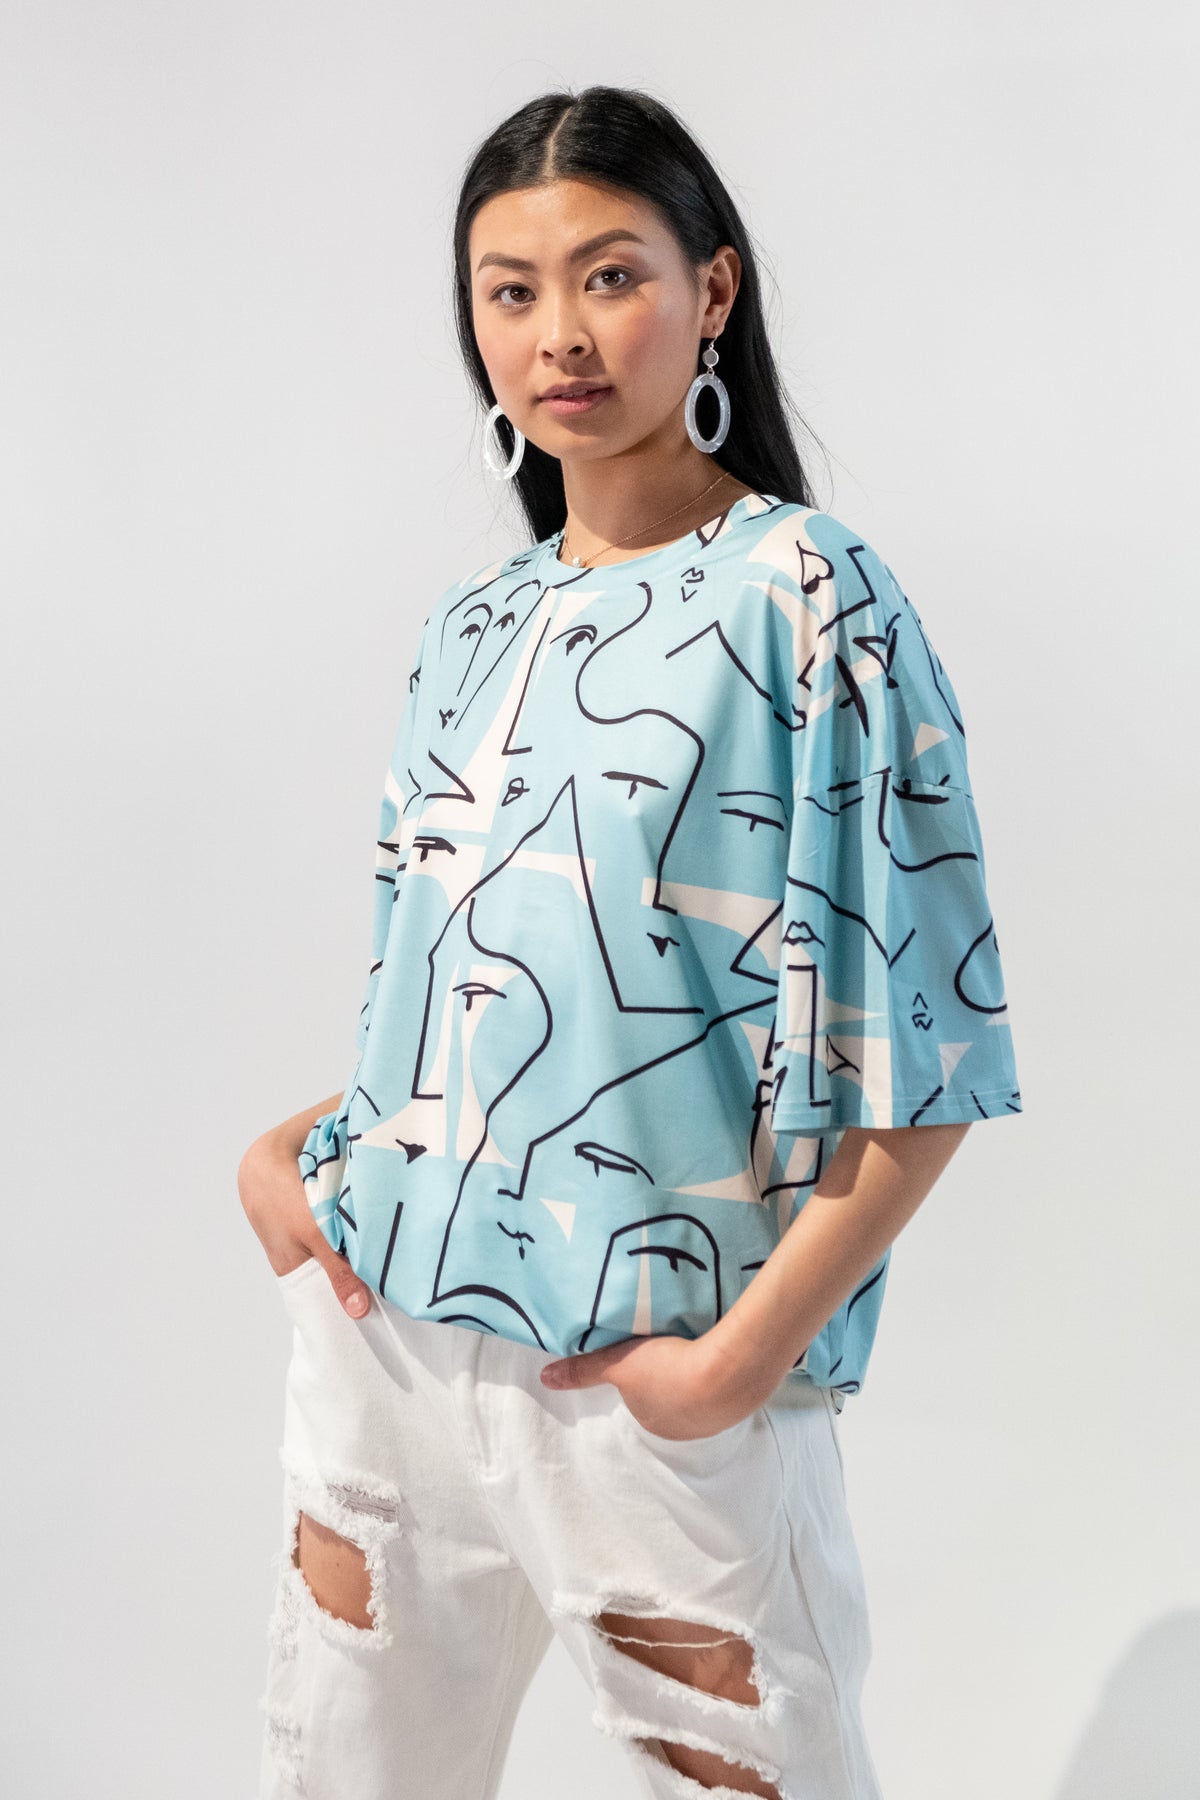 Model wearing a blue oversized t-shirt with an abstract faces graphic design